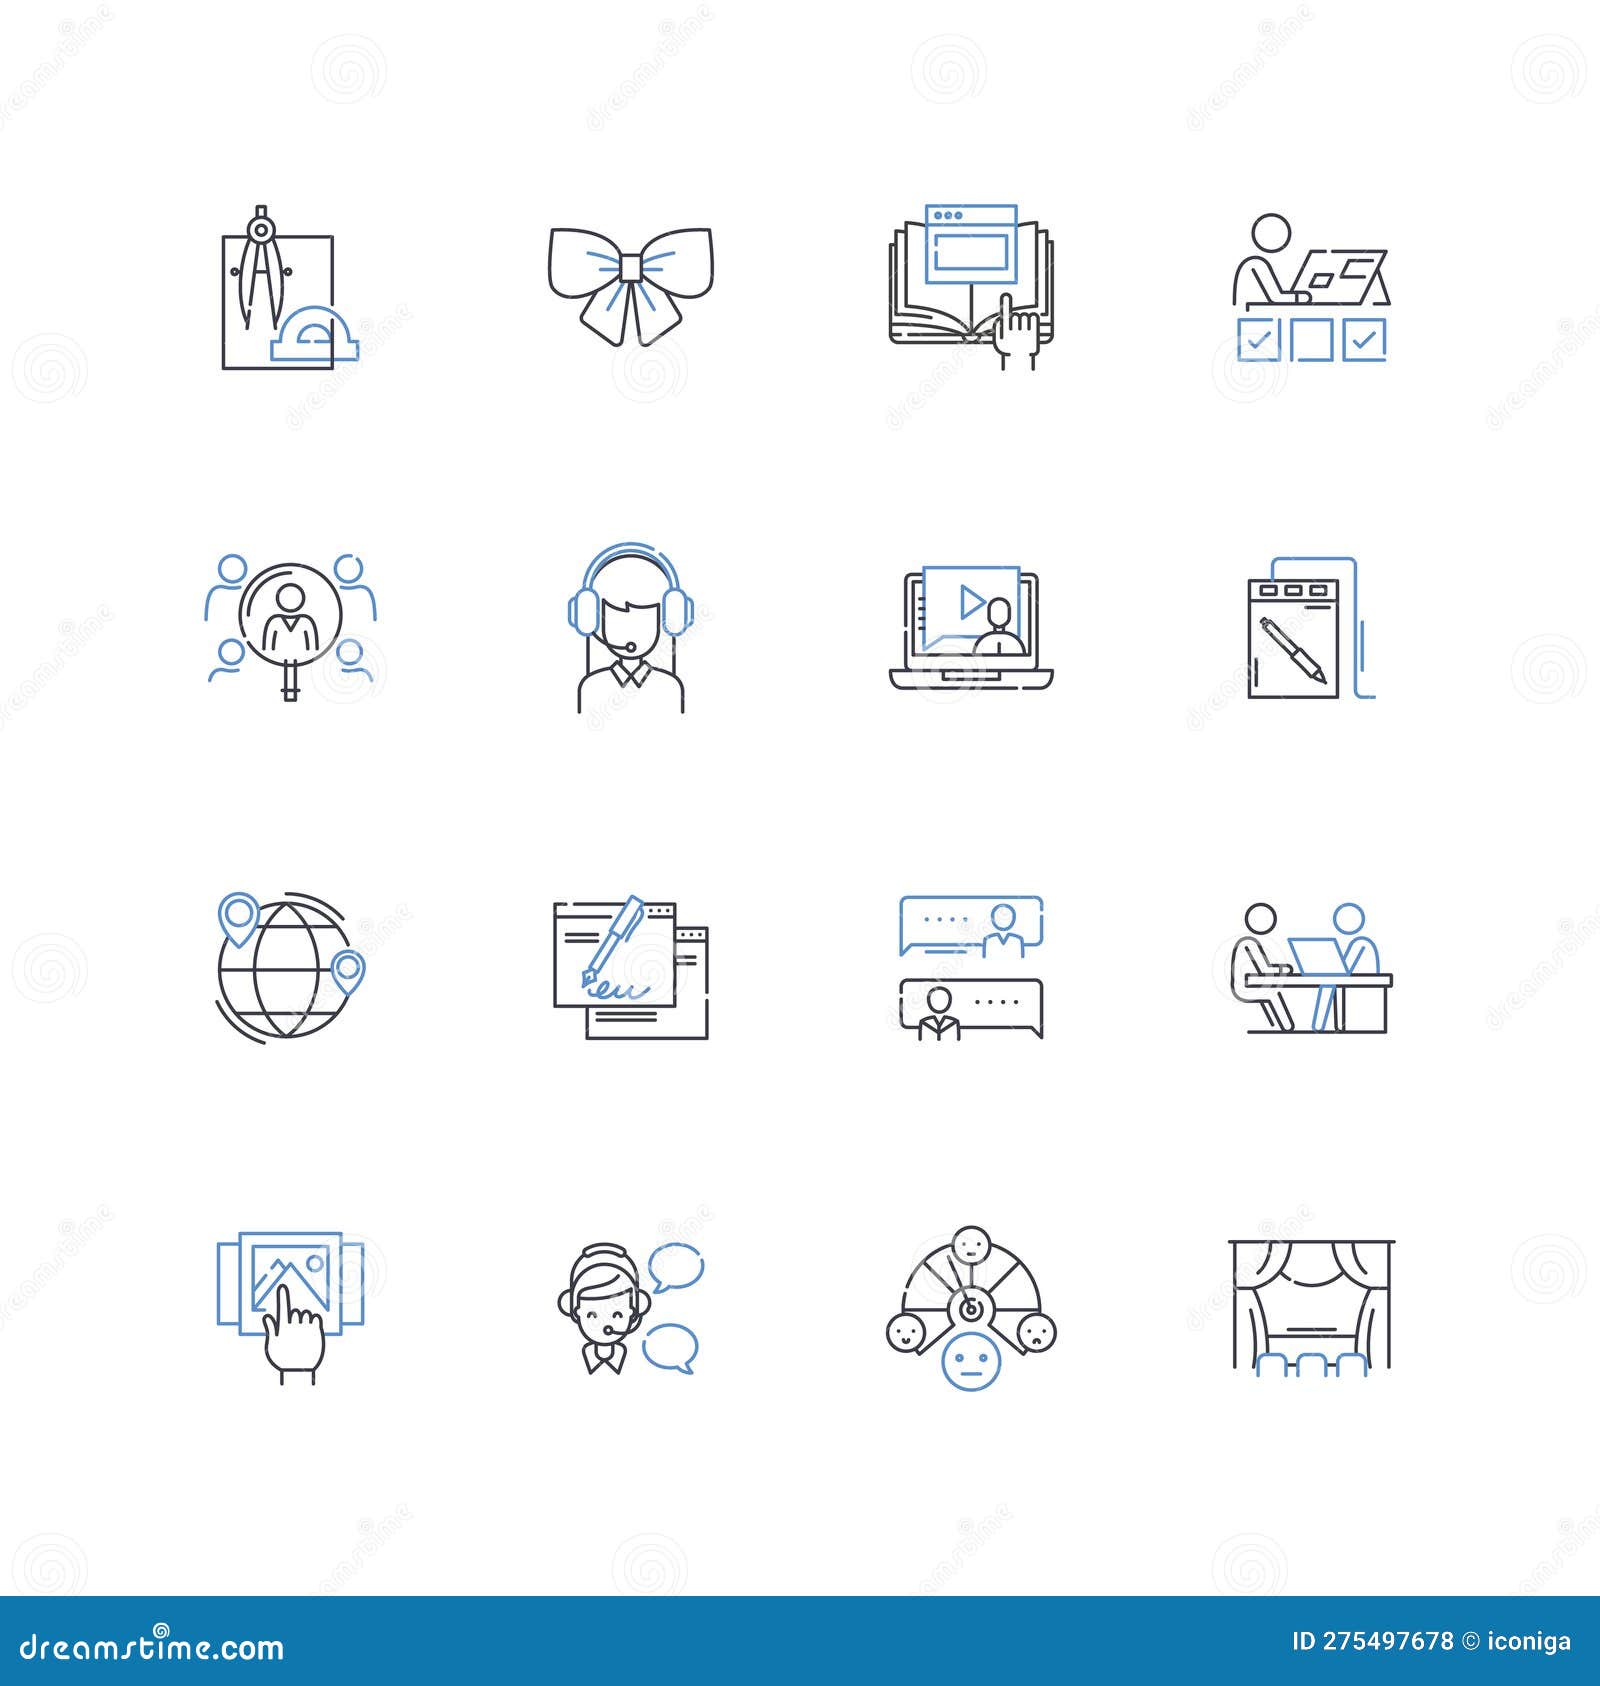 jobber line icons collection. scheduling, invoicing, quoting, estimating, dispatching, calendar, tracking  and